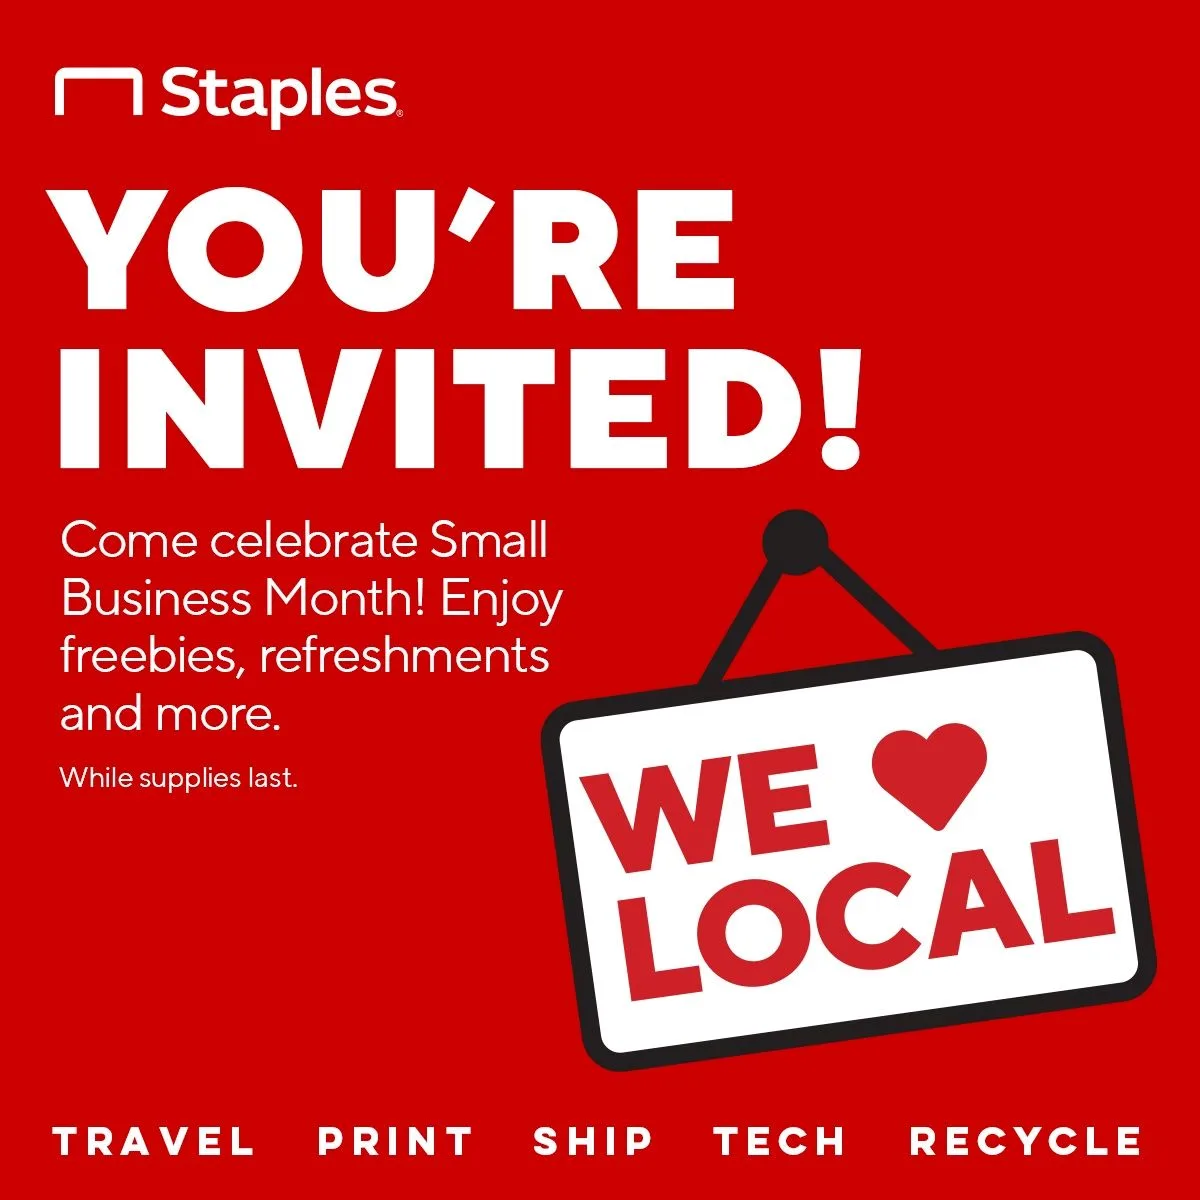 westminster staples shop local small business month event